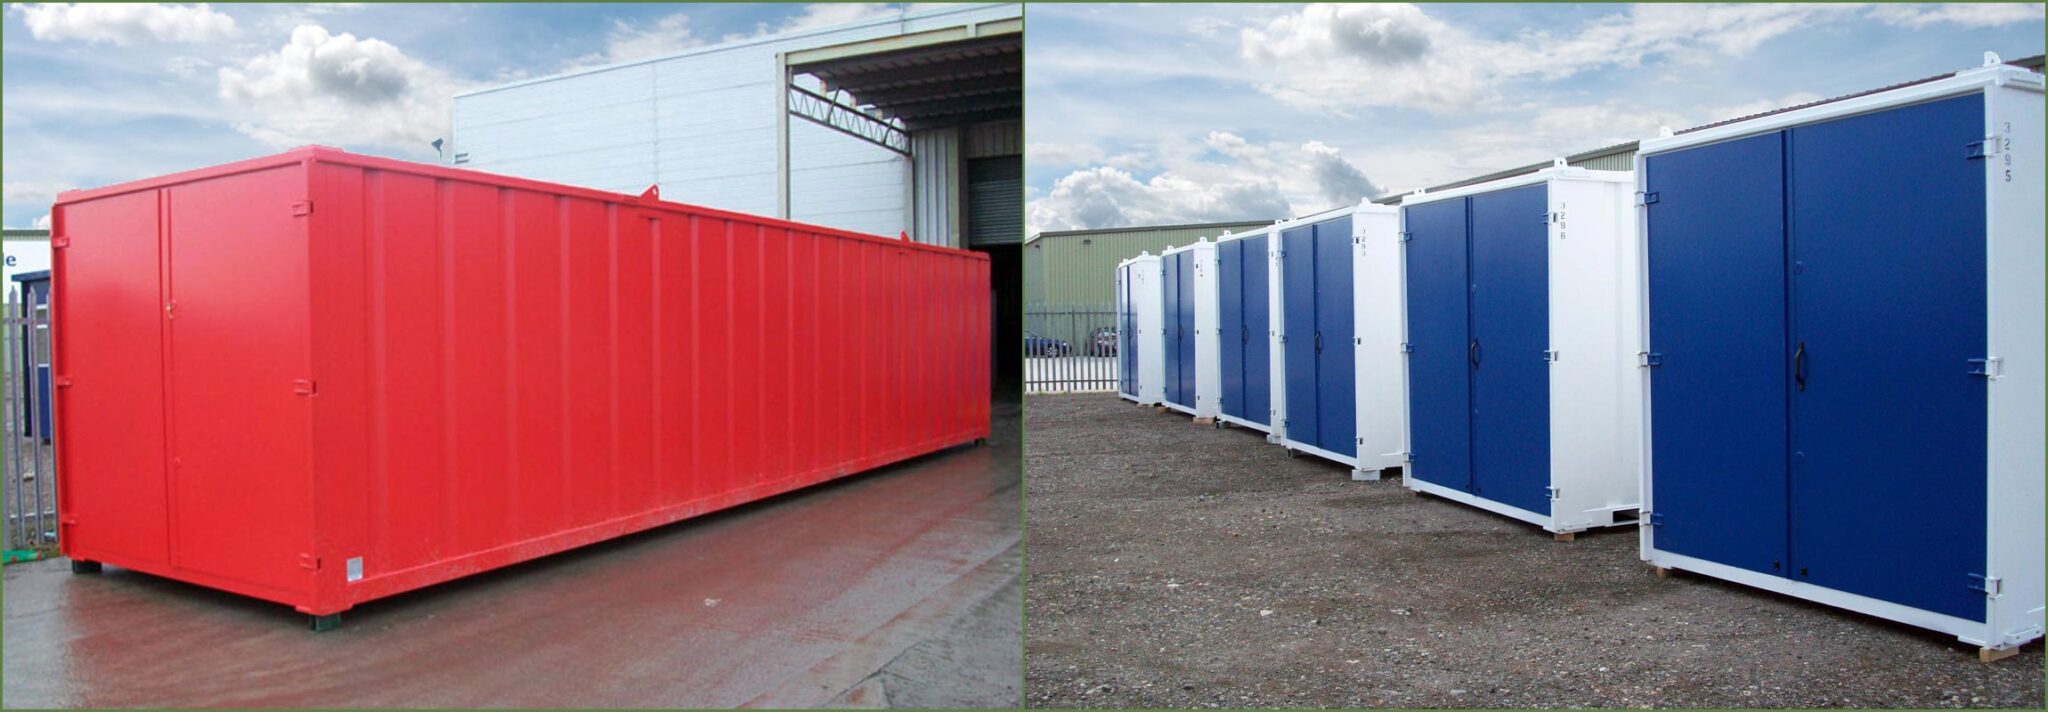 Providers of Secure Steel Container Buildings